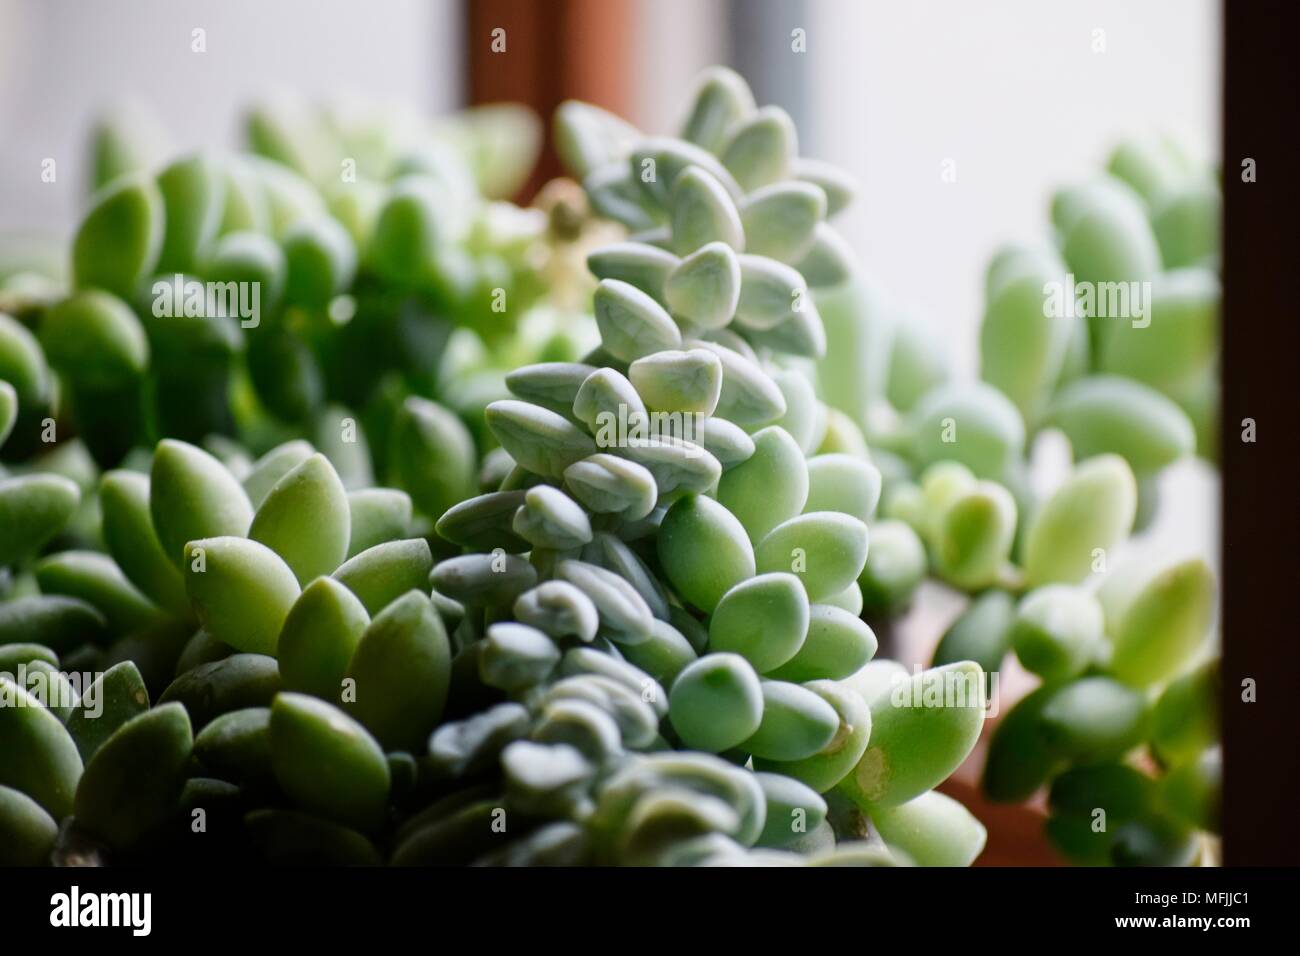 A macro image of a green succulent plant in natural light by a window Stock Photo